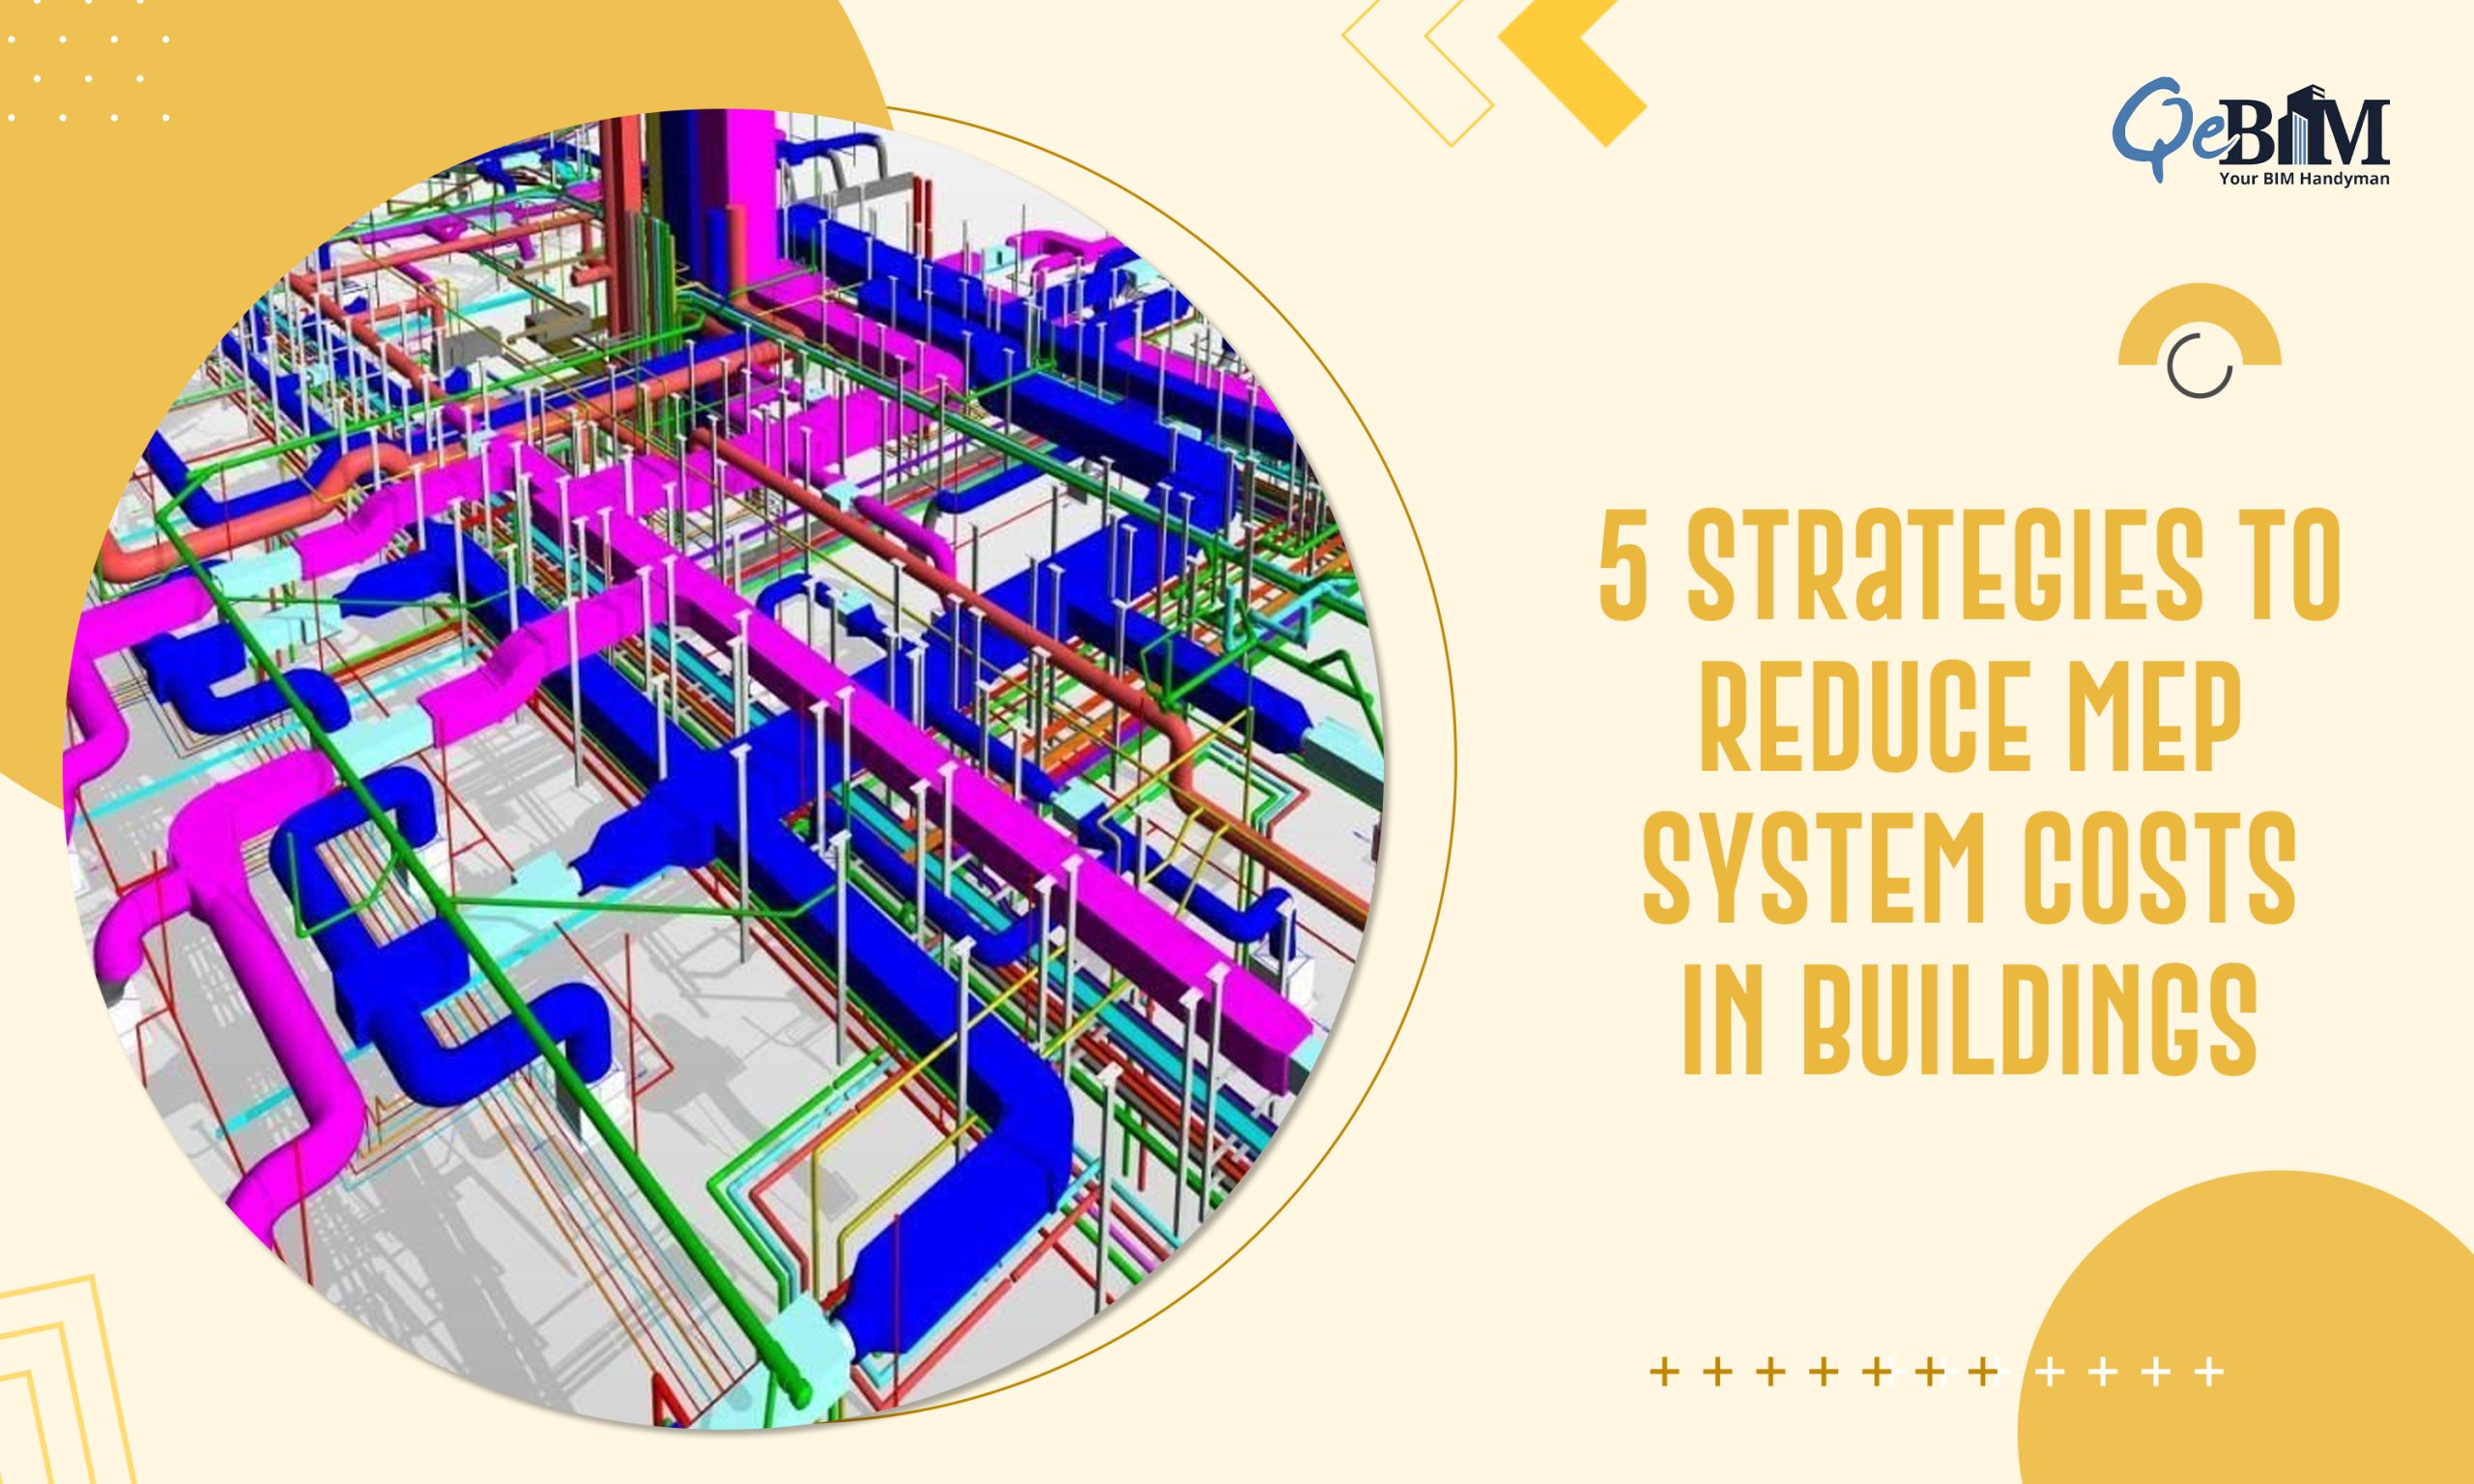 5 Strategies to Reduce MEP System Costs in Buildings